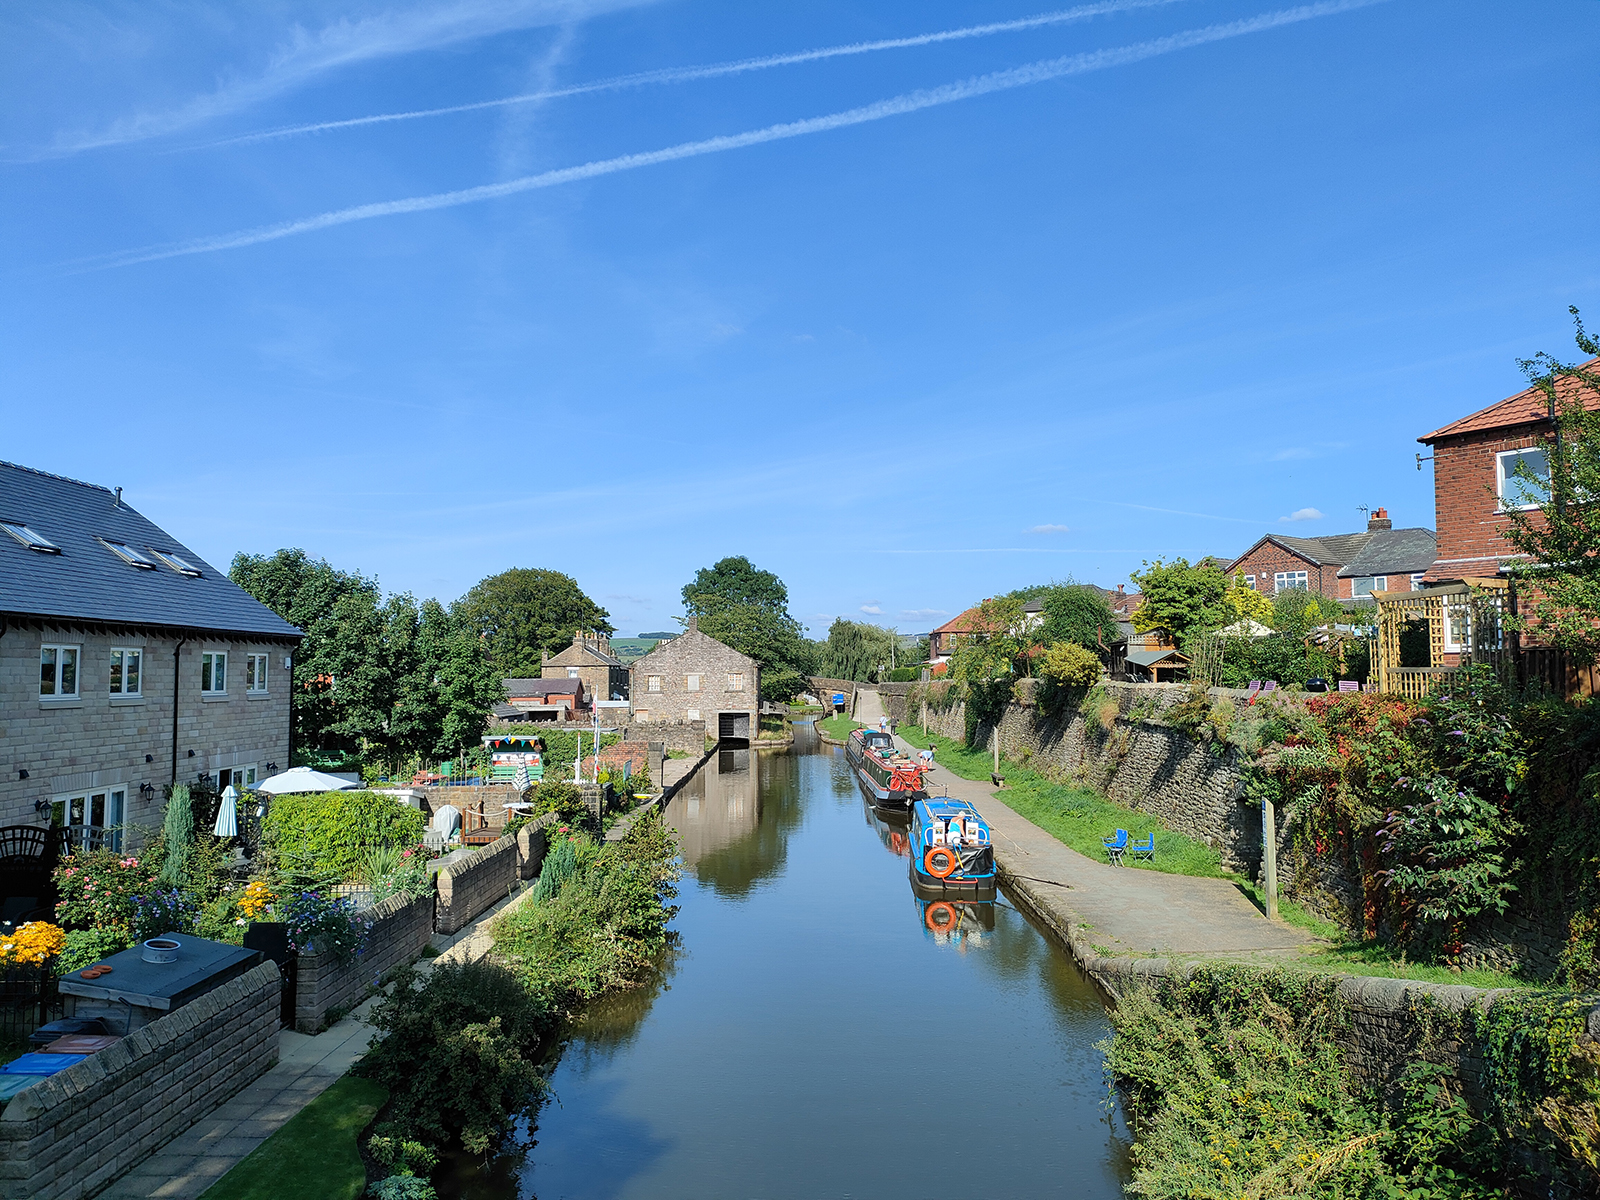 Realme GT Master Edition camera samples – a canal on a sunny day.